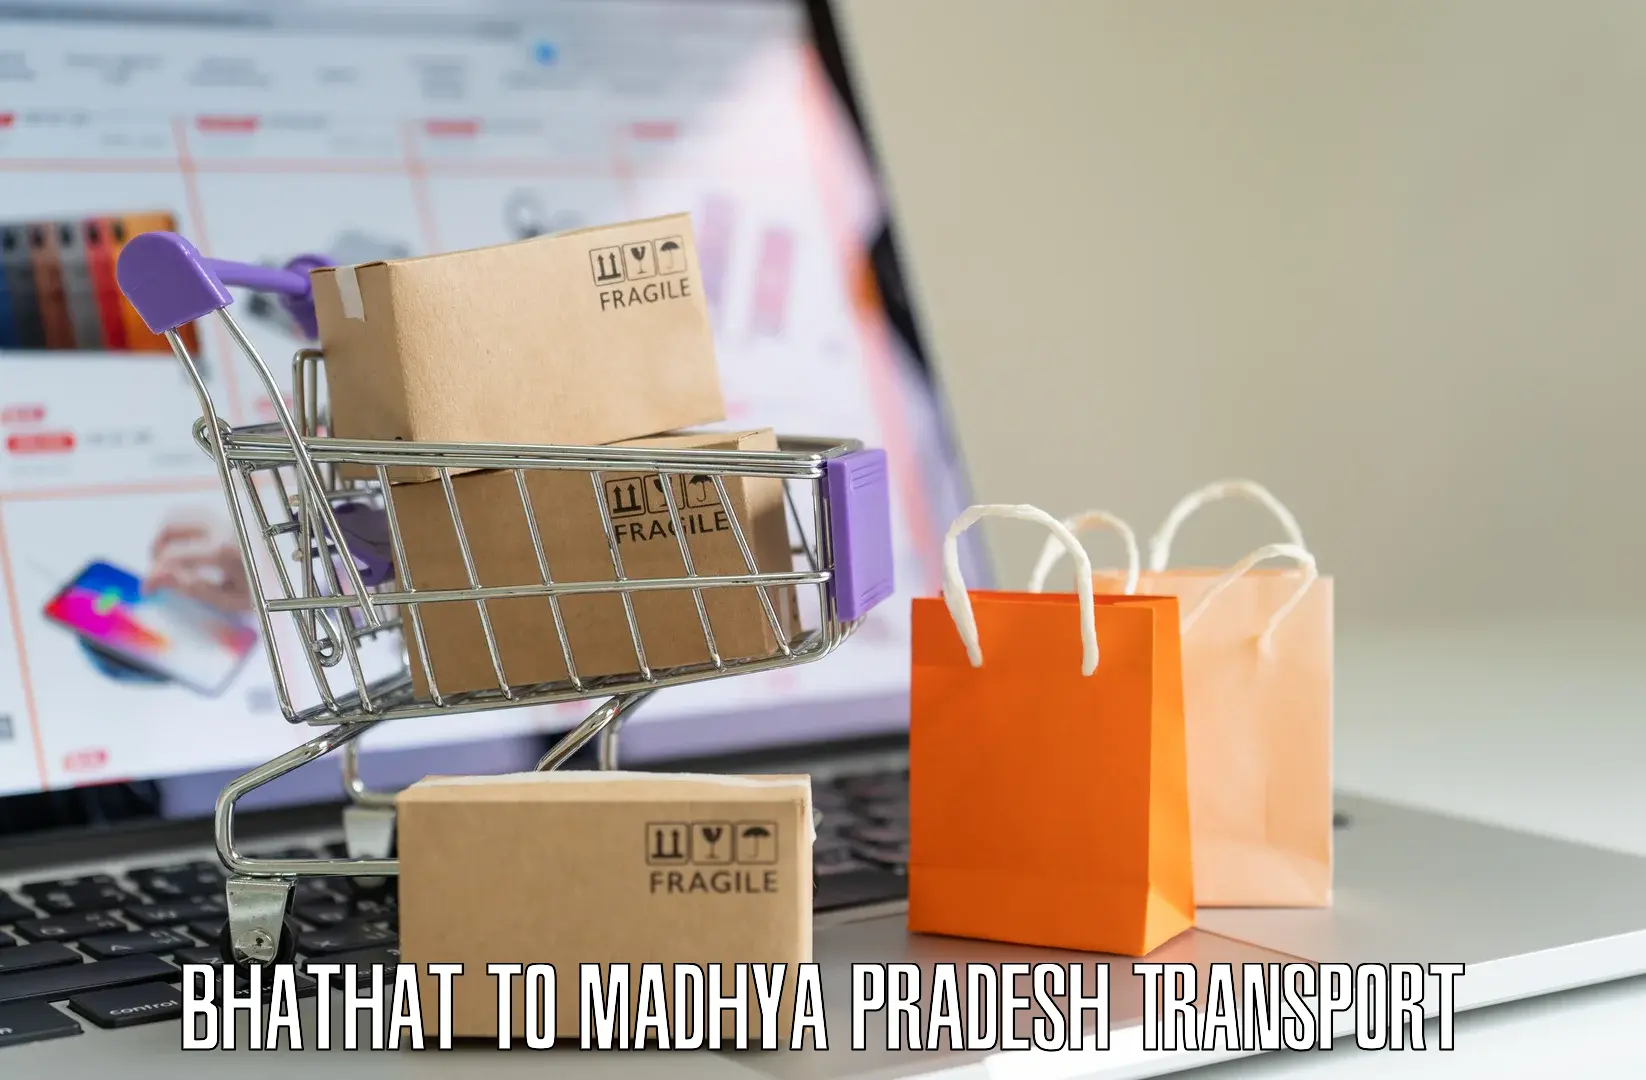 Nearby transport service Bhathat to Parasia